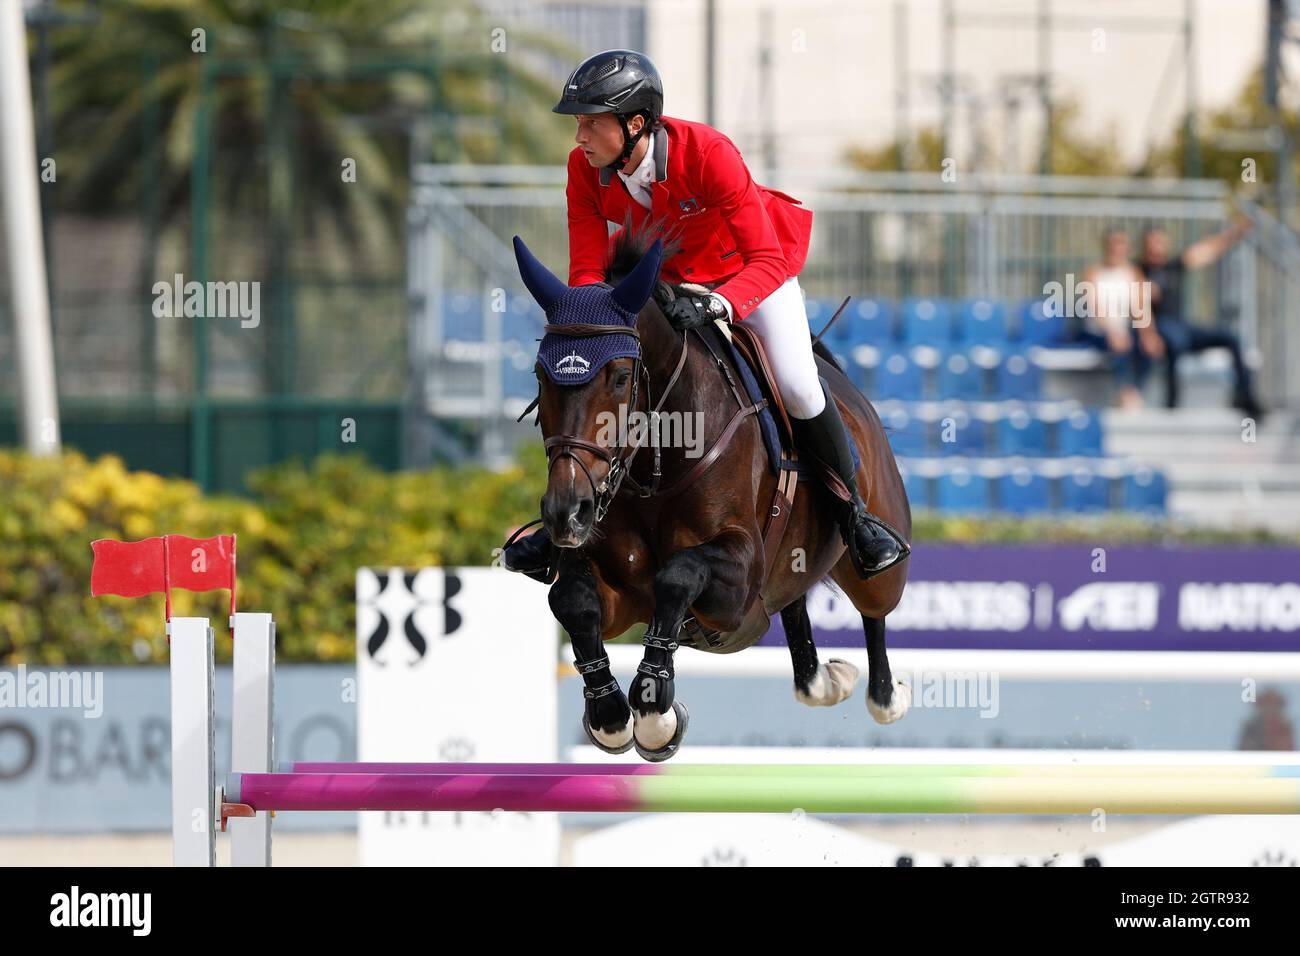 Martin Fuchs of Switzerland riding The Sinner during the CSIO Barcelona: Longines FEI jumping Nations Cup at Real Club de Polo of Barcelona. Stock Photo